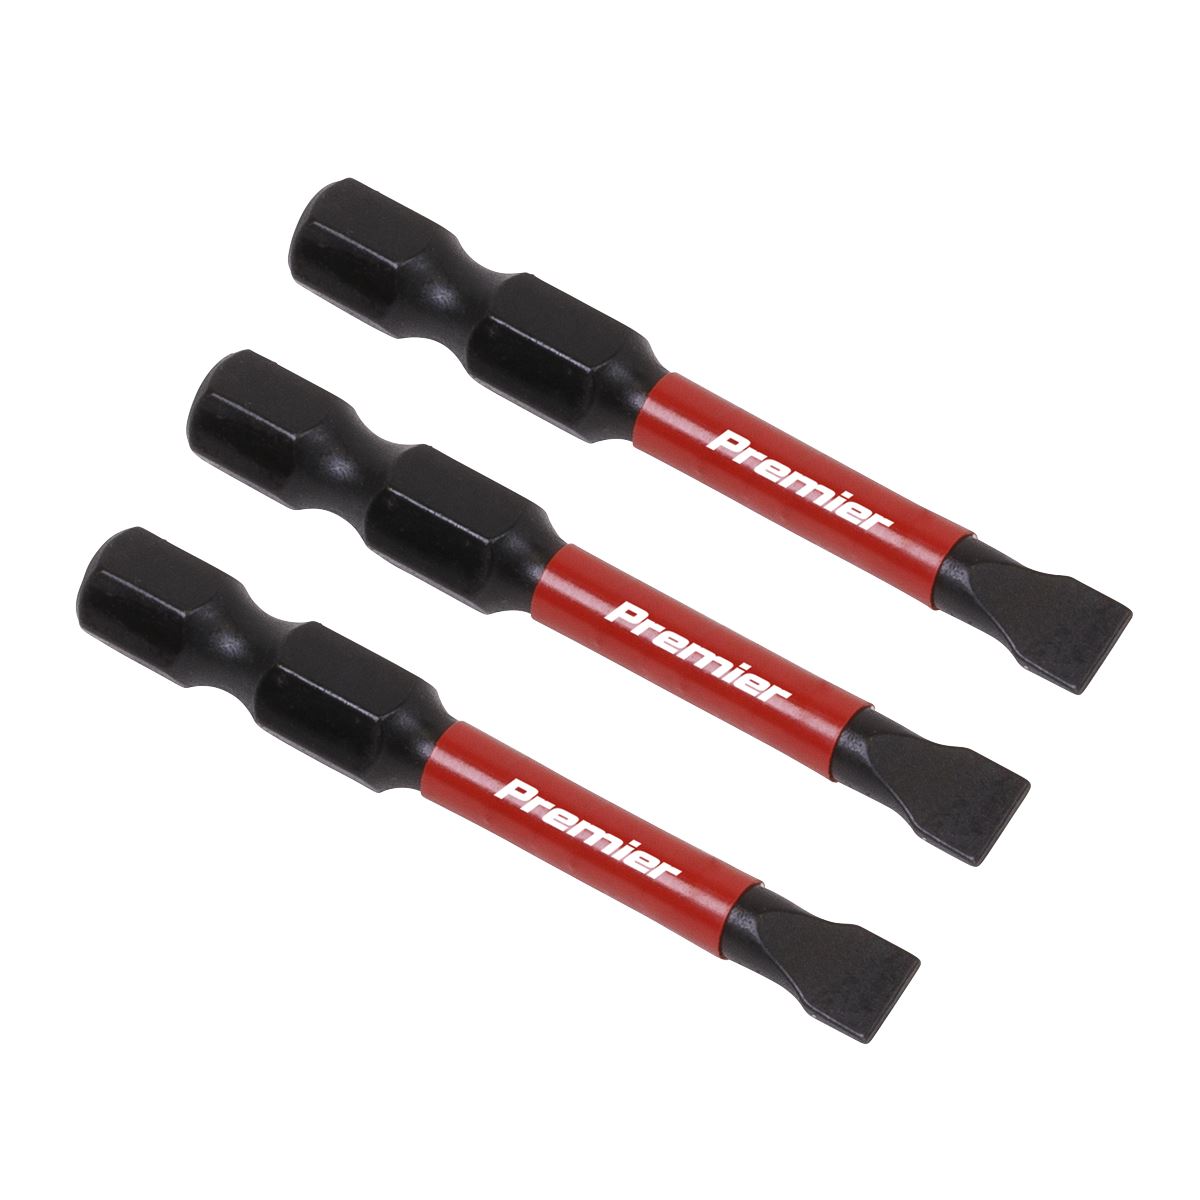 Sealey Premier Slotted 5.5mm Impact Power Tool Bits 50mm - 3pc